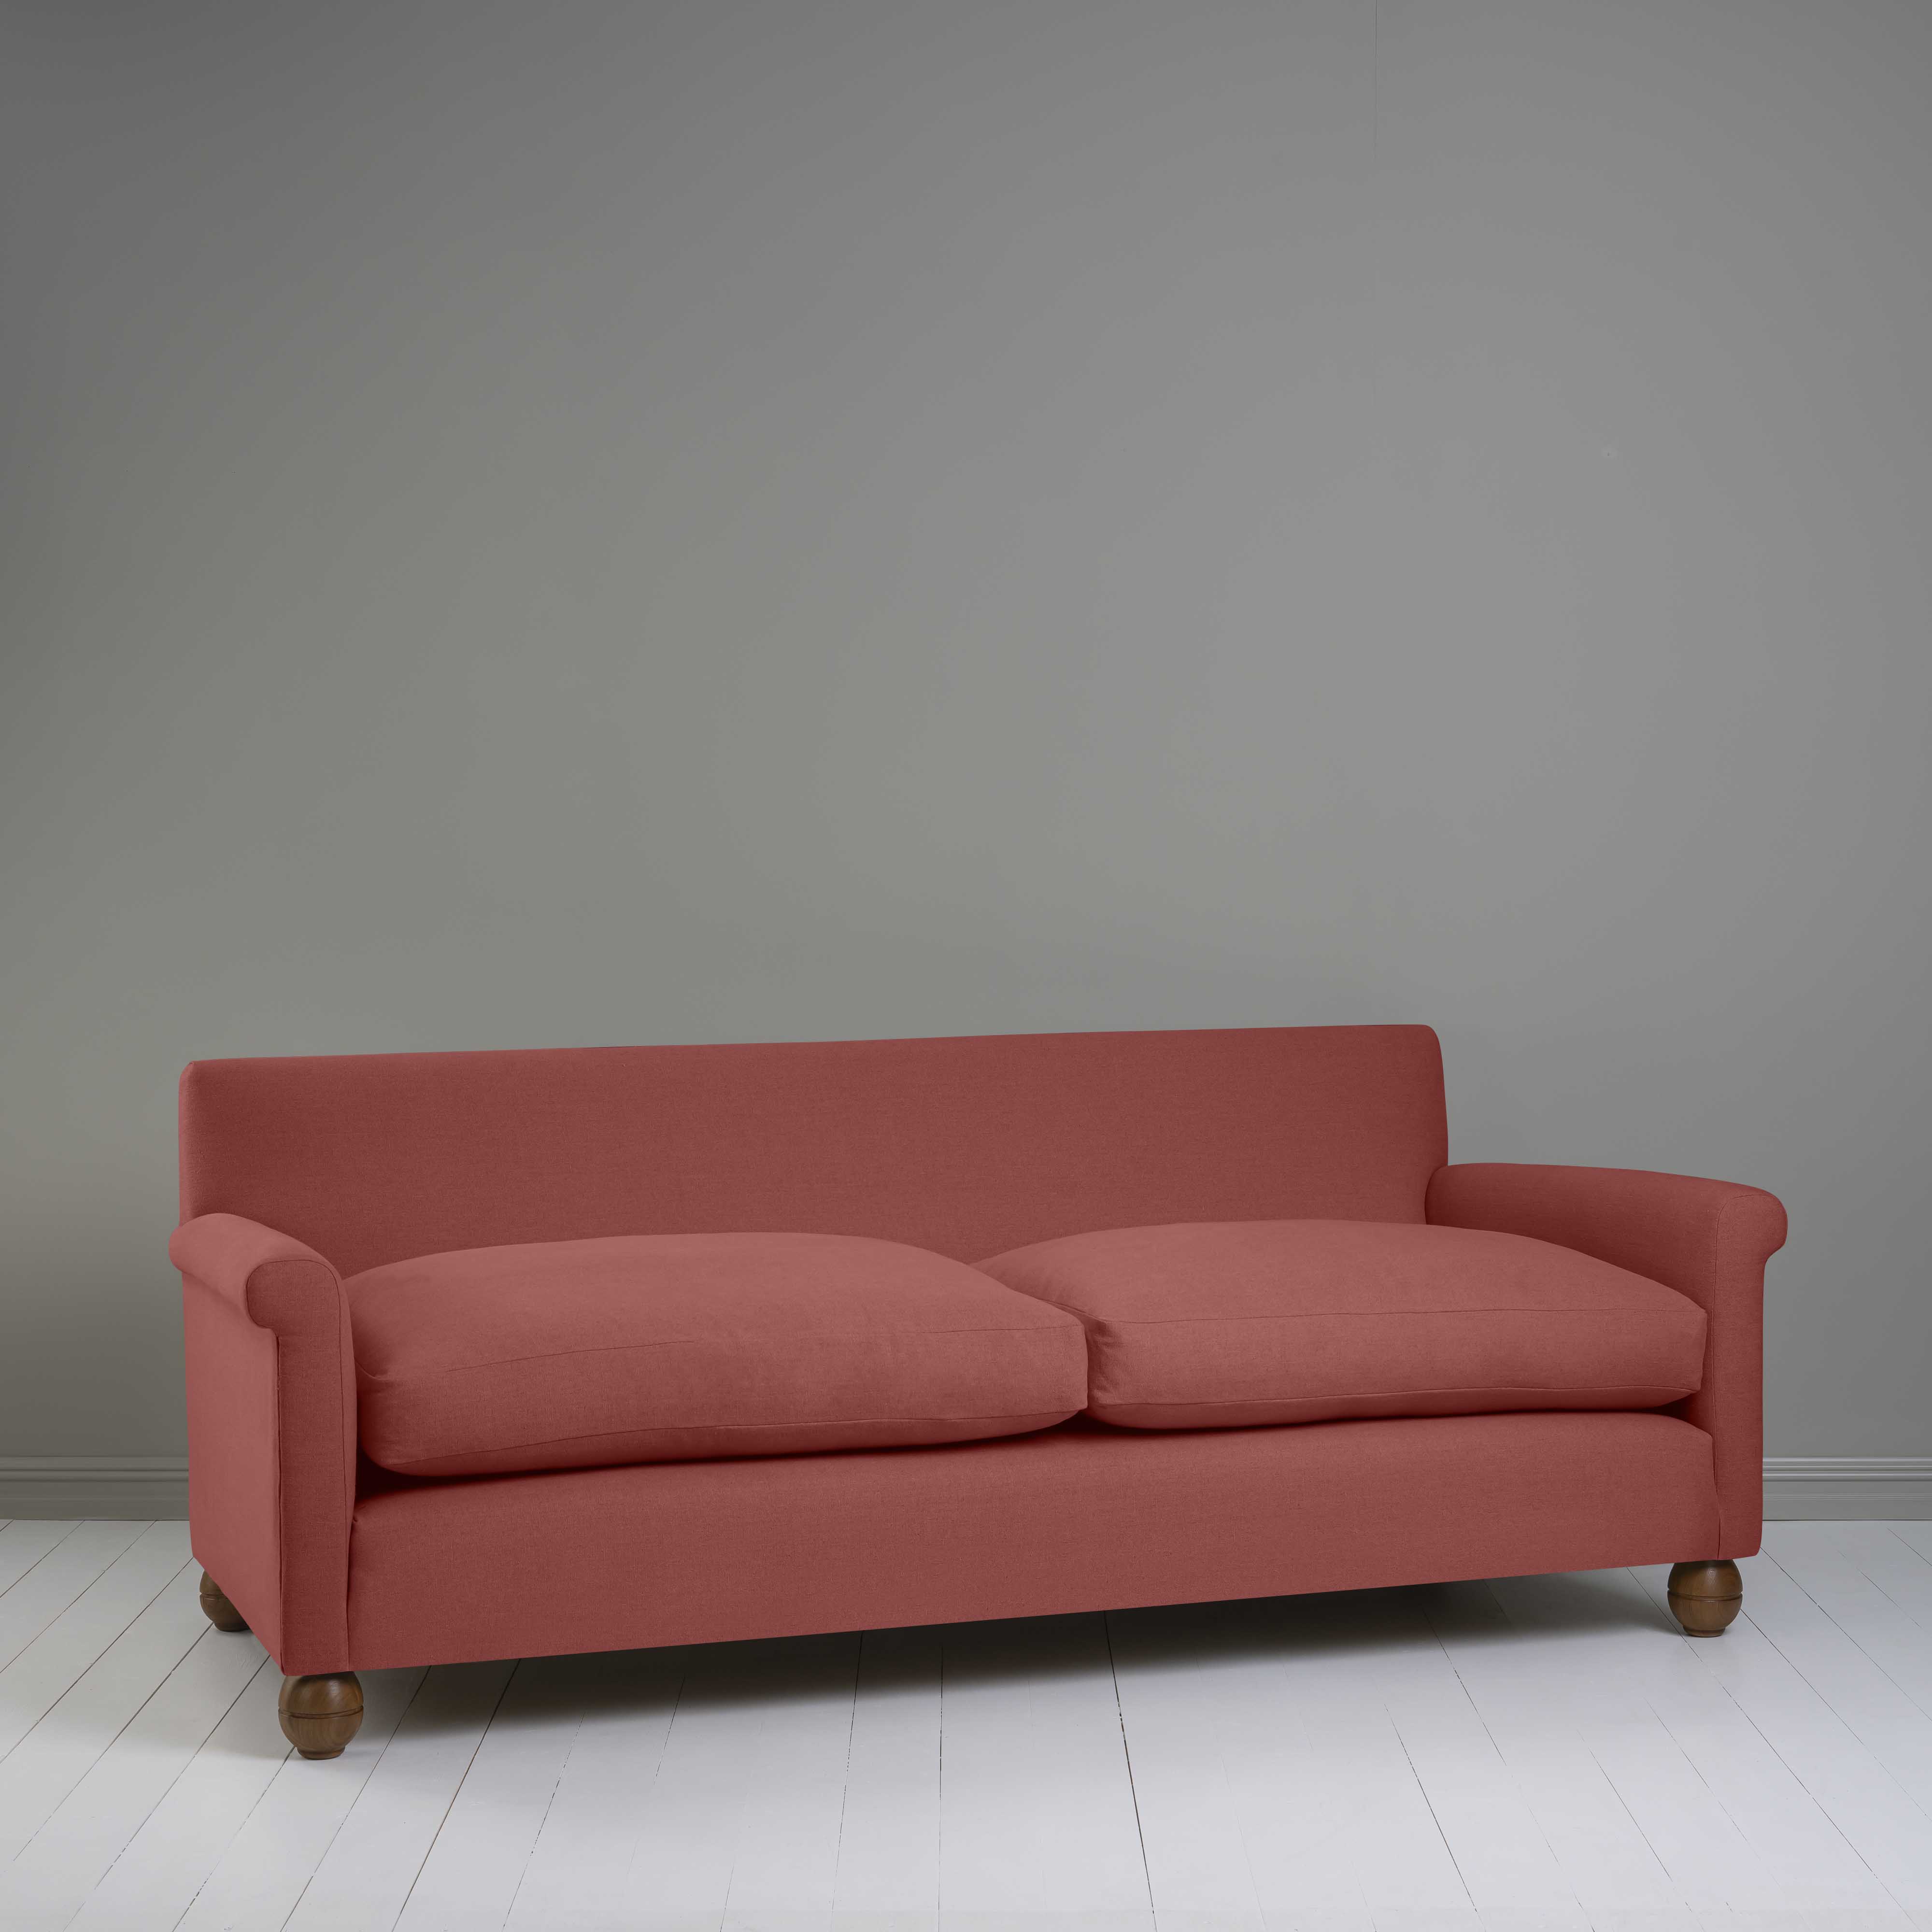  Idler 4 seater sofa in Laidback Linen Rouge 